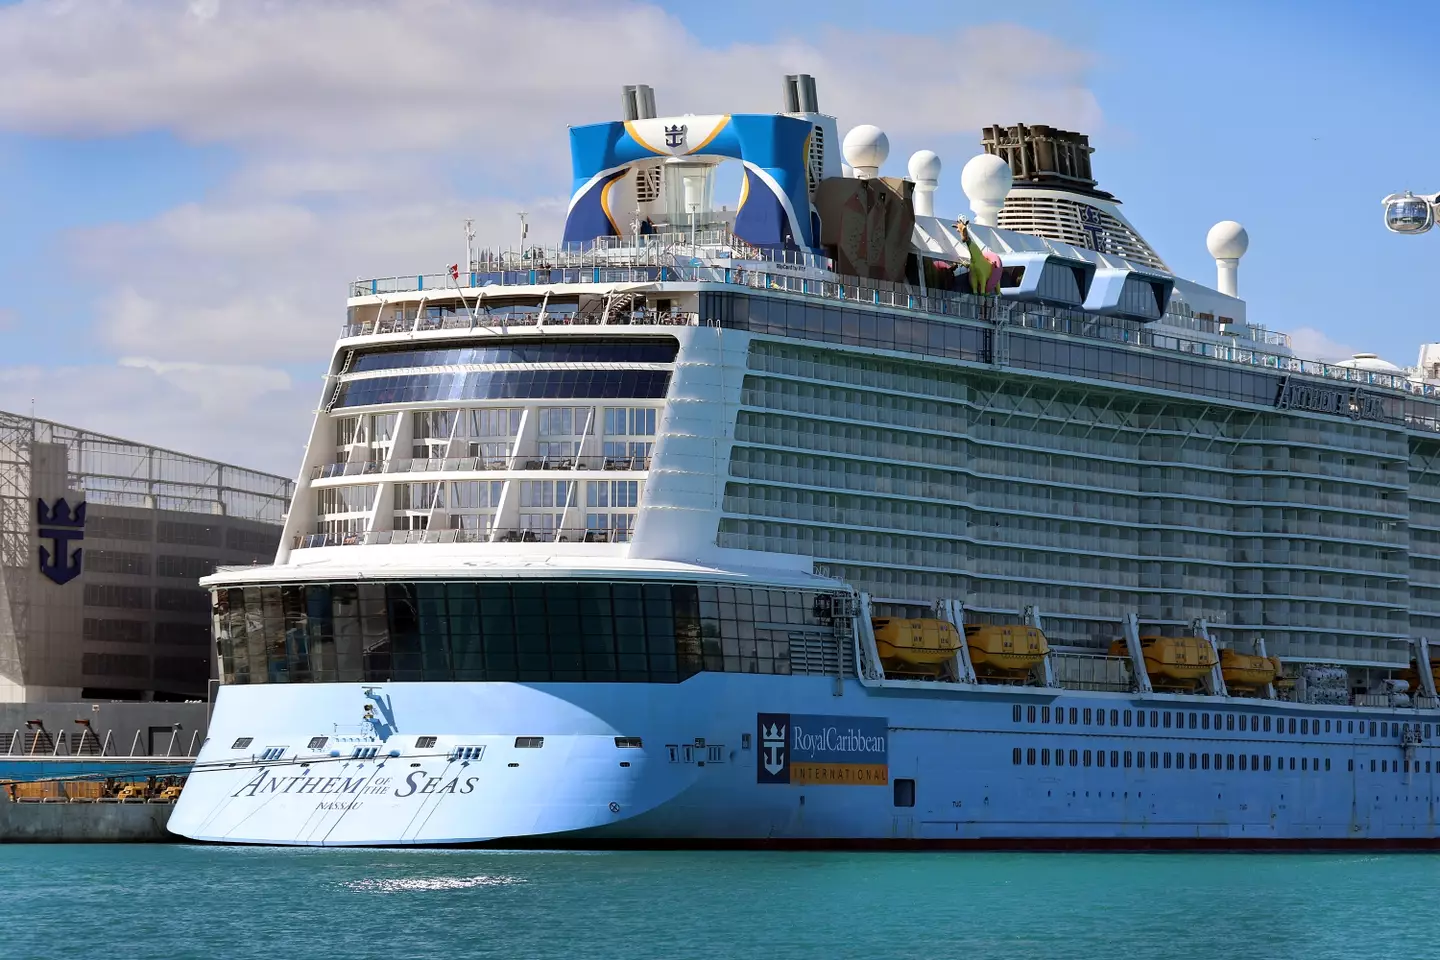 The Royal Caribbean liner will depart from PortMiami.